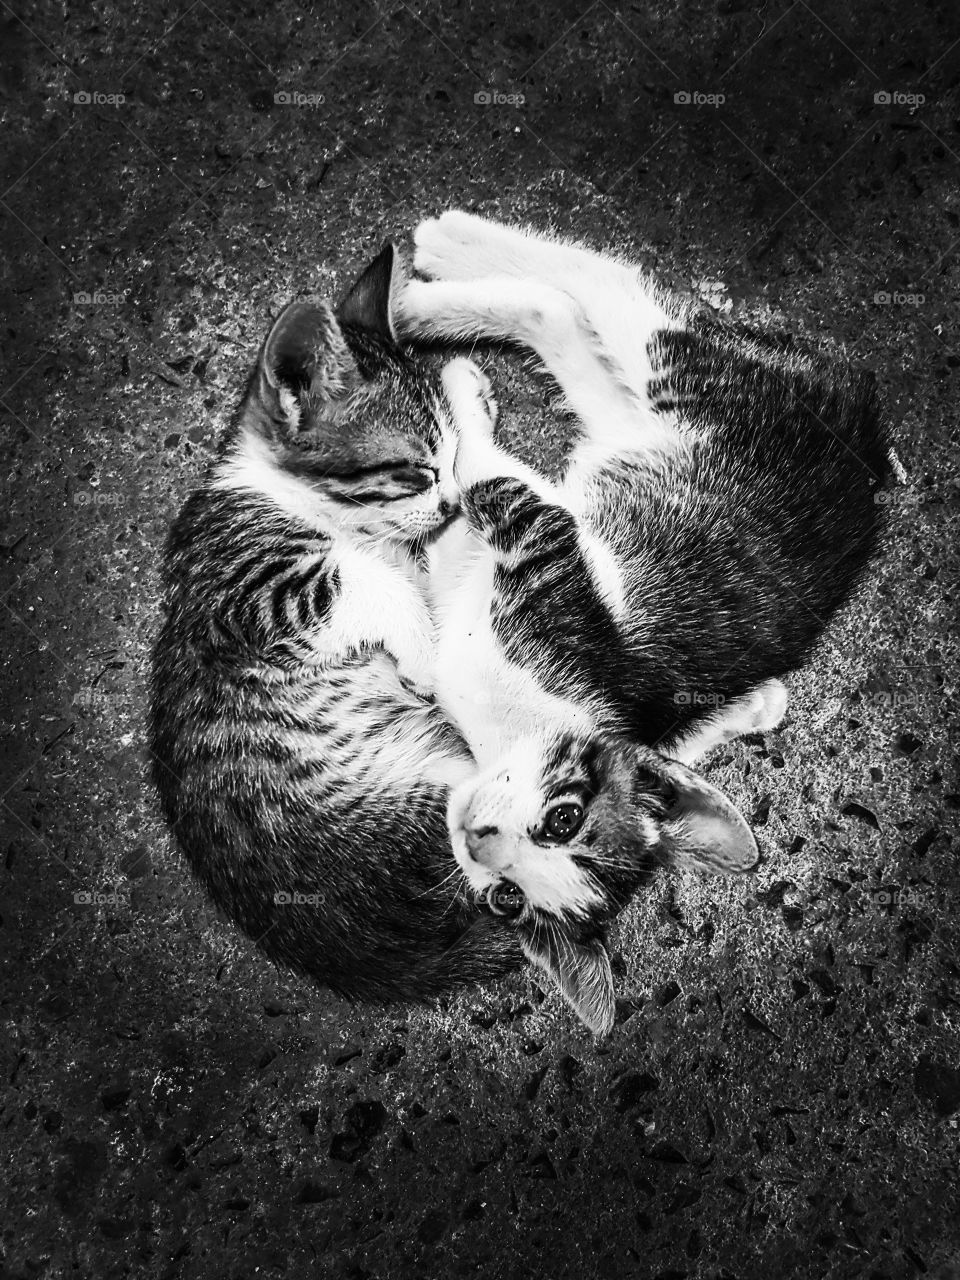 Two cats sleep together.